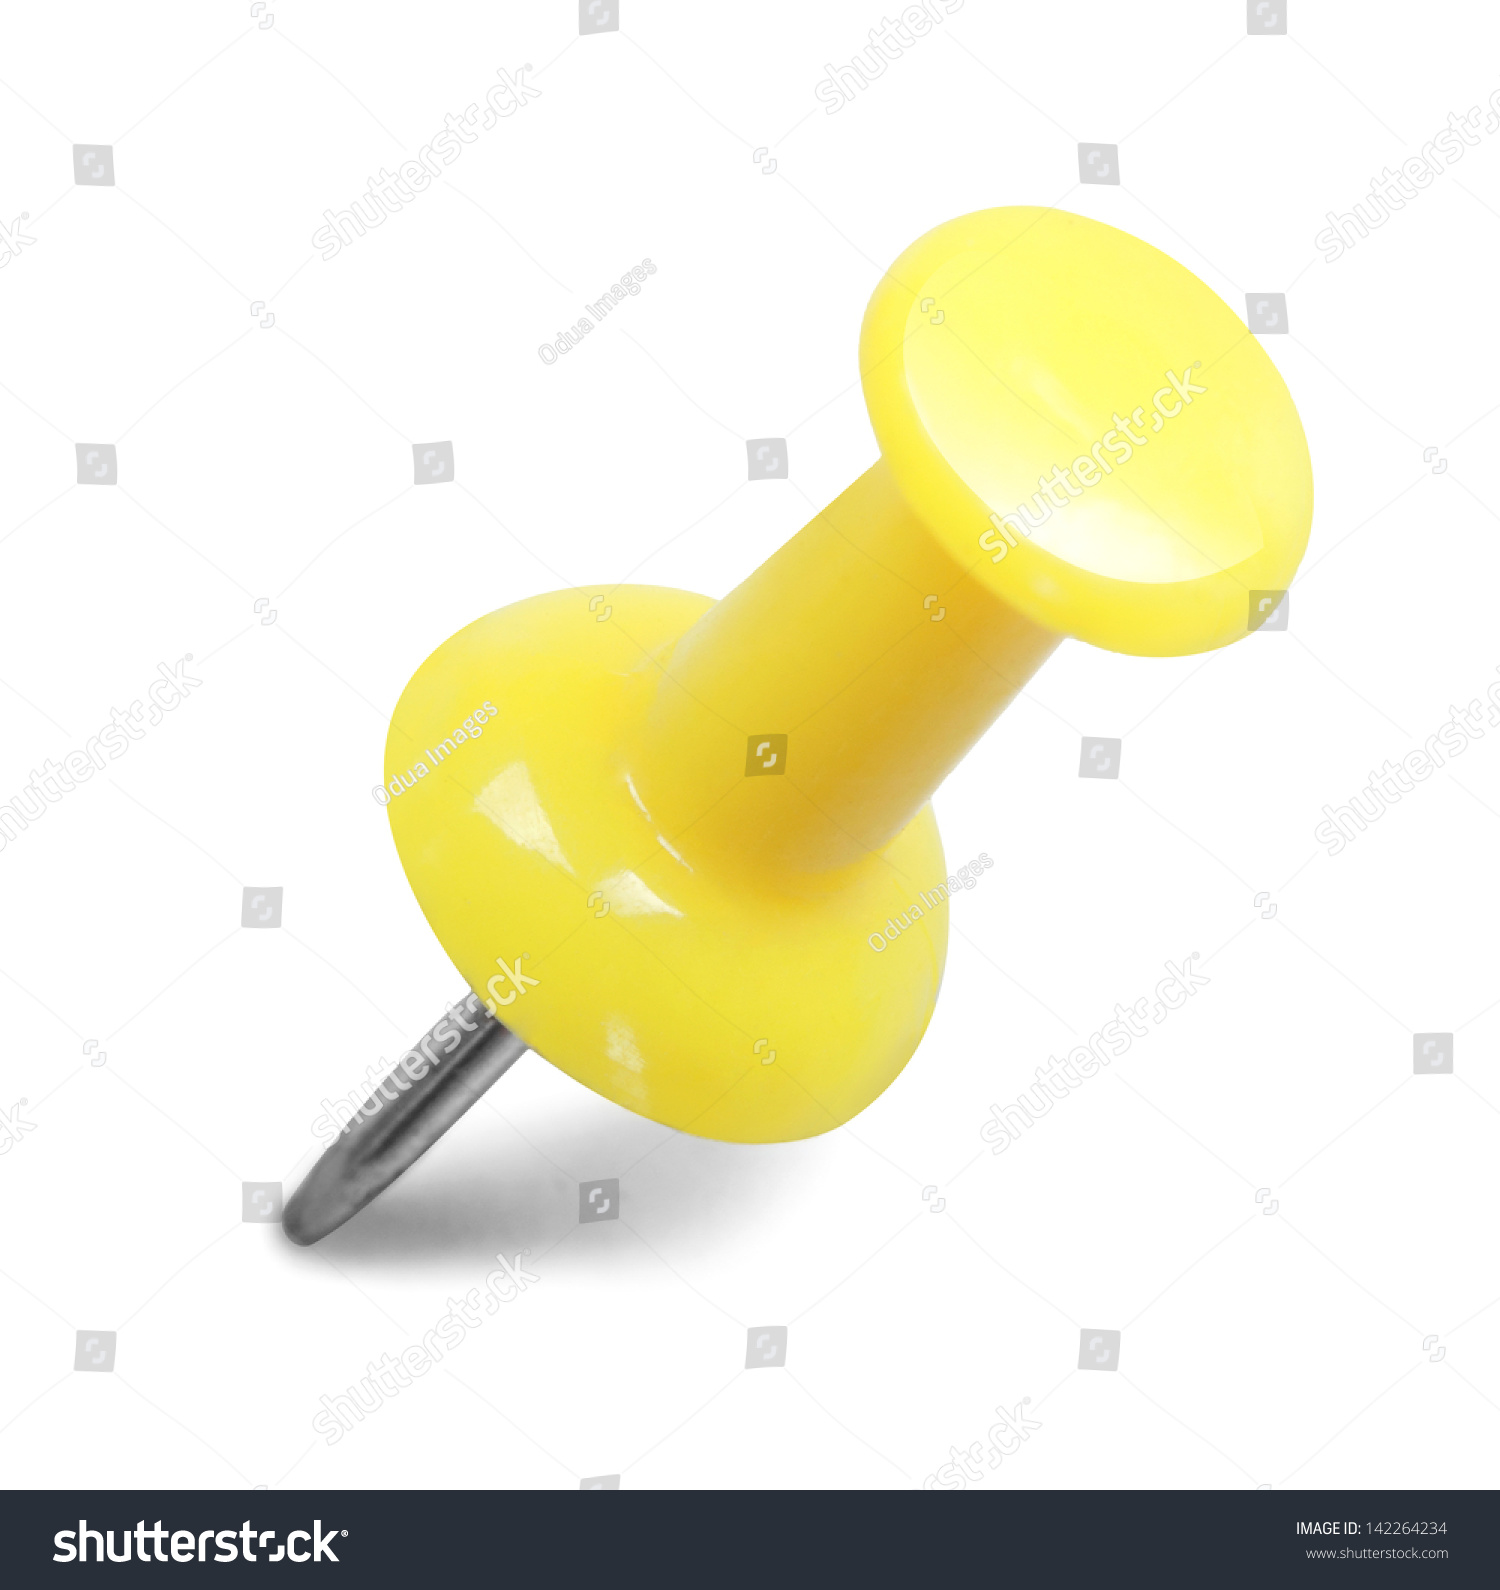 Close Up Of A Yellow Pushpin Isolated On White Background Stock Photo ...